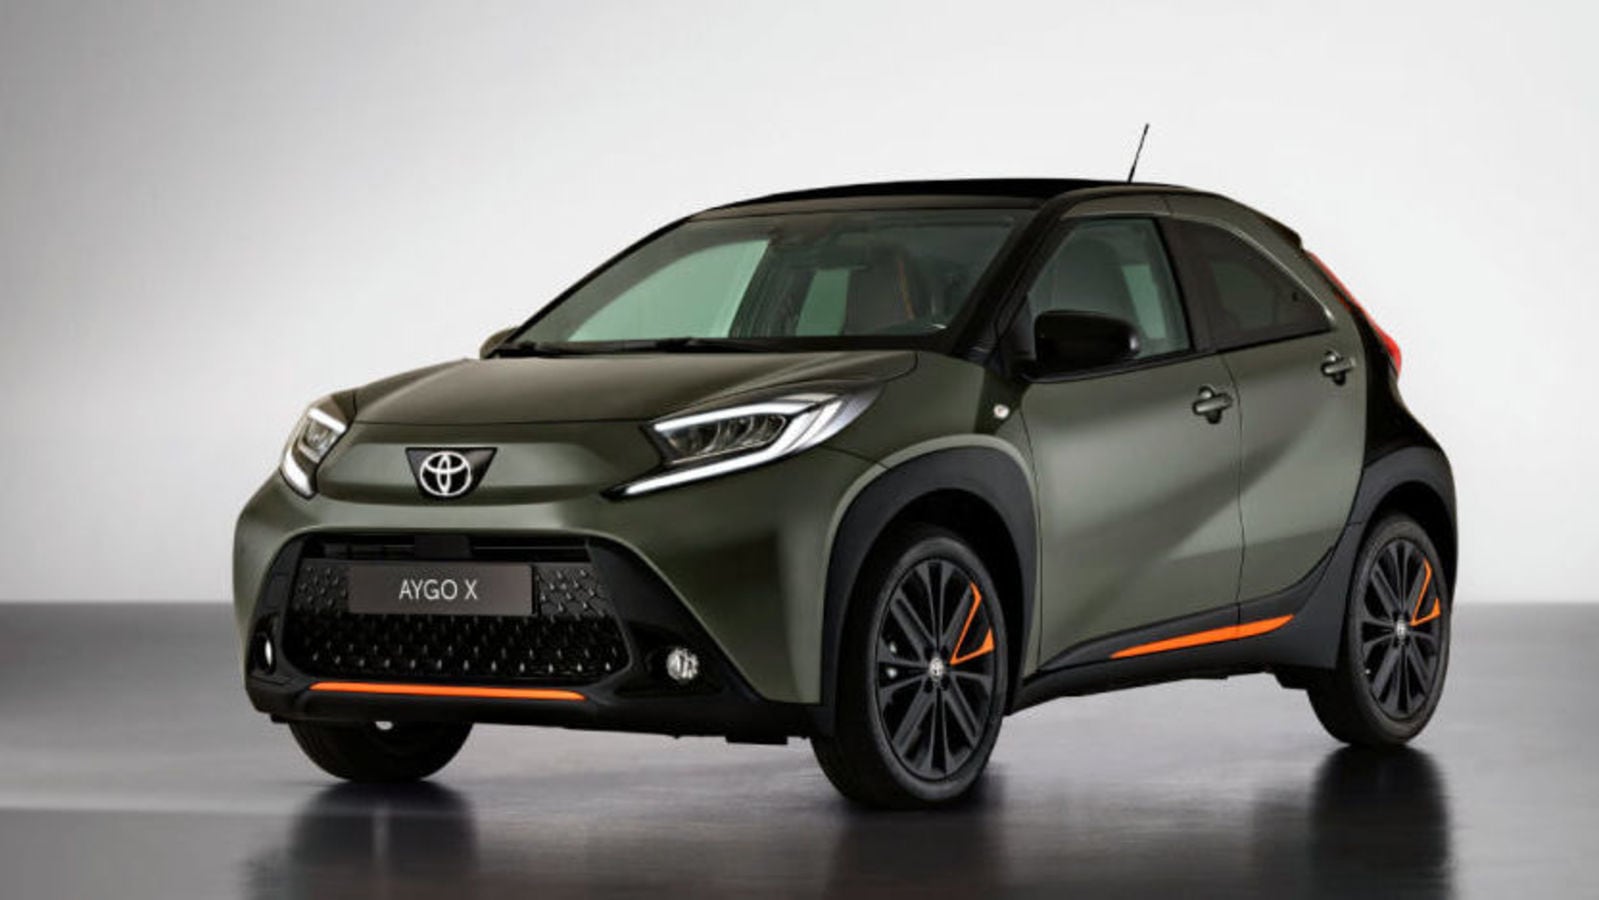 Toyota Aygo X sub-compact car can take on Tata Punch